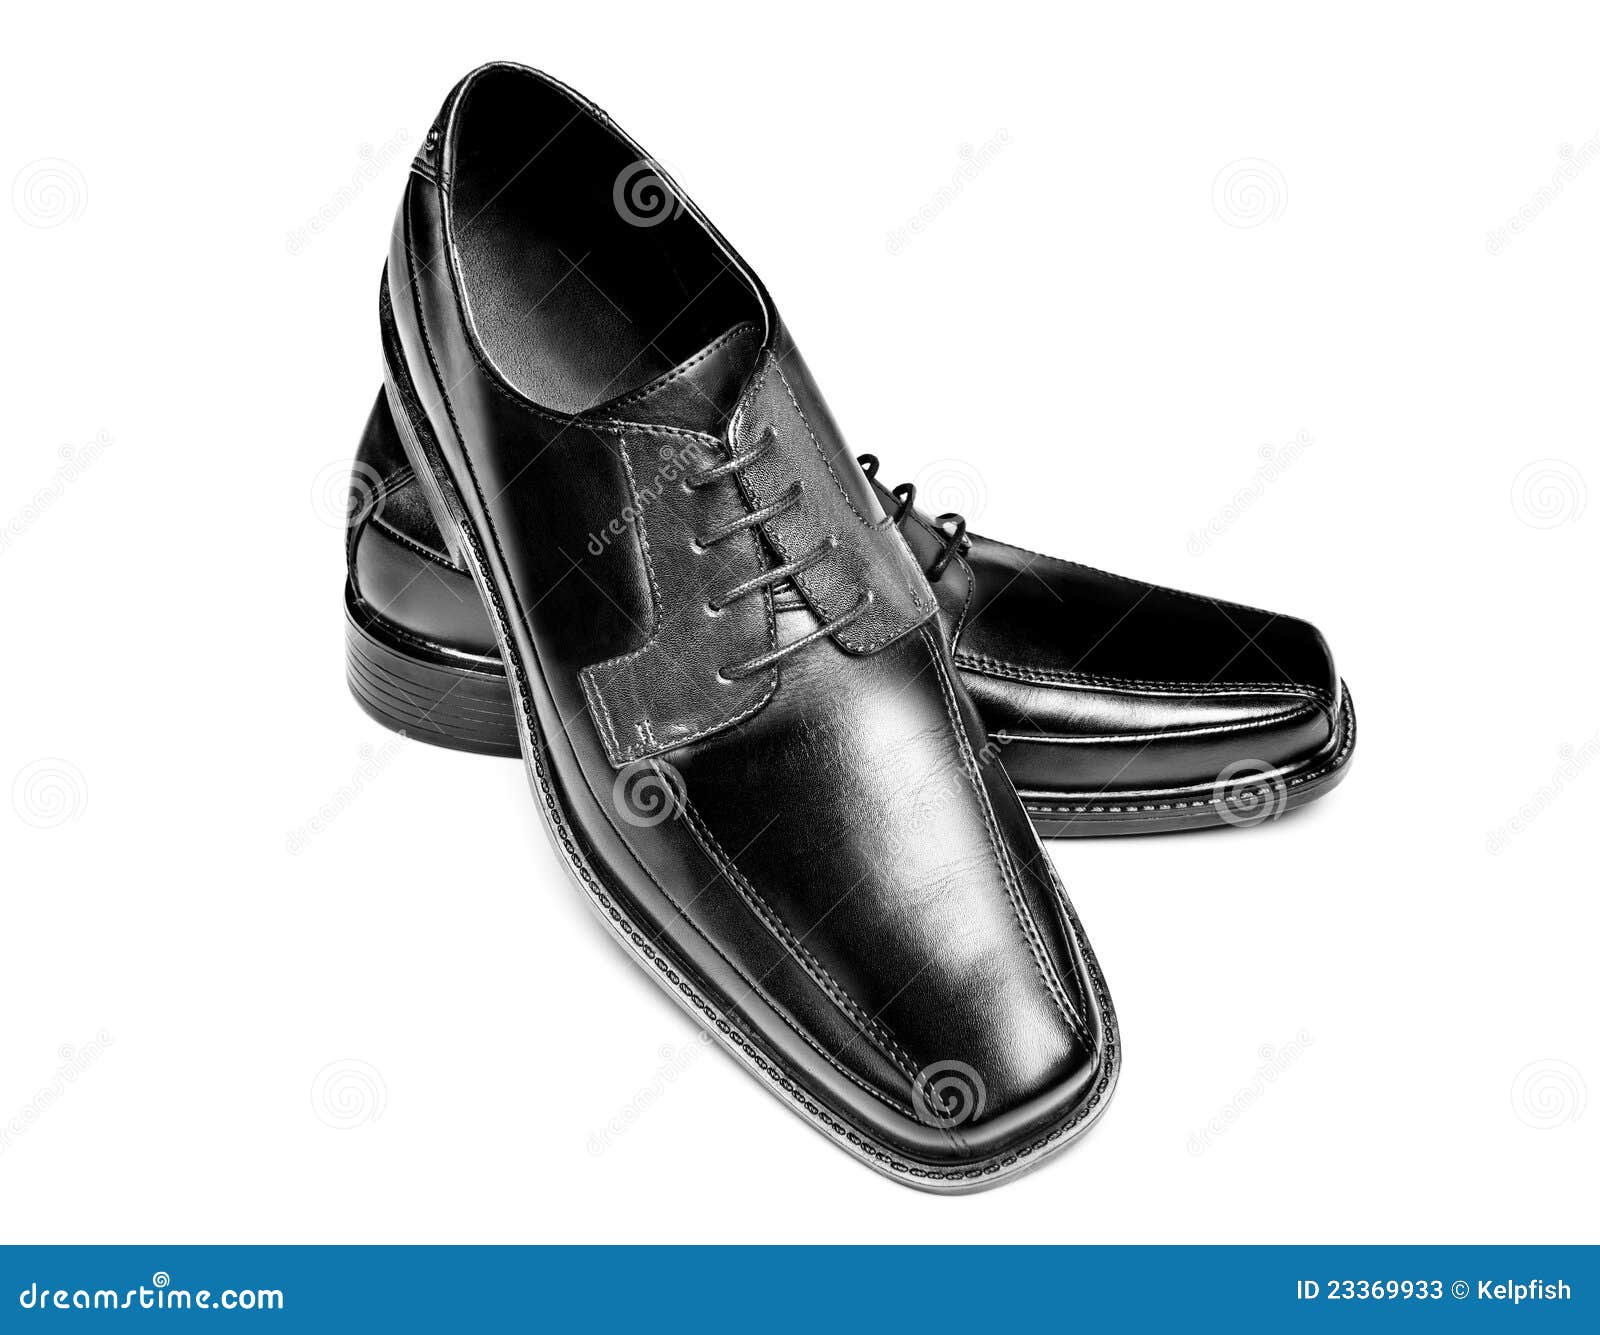 Black leather dress shoes stock image. Image of gray - 23369933